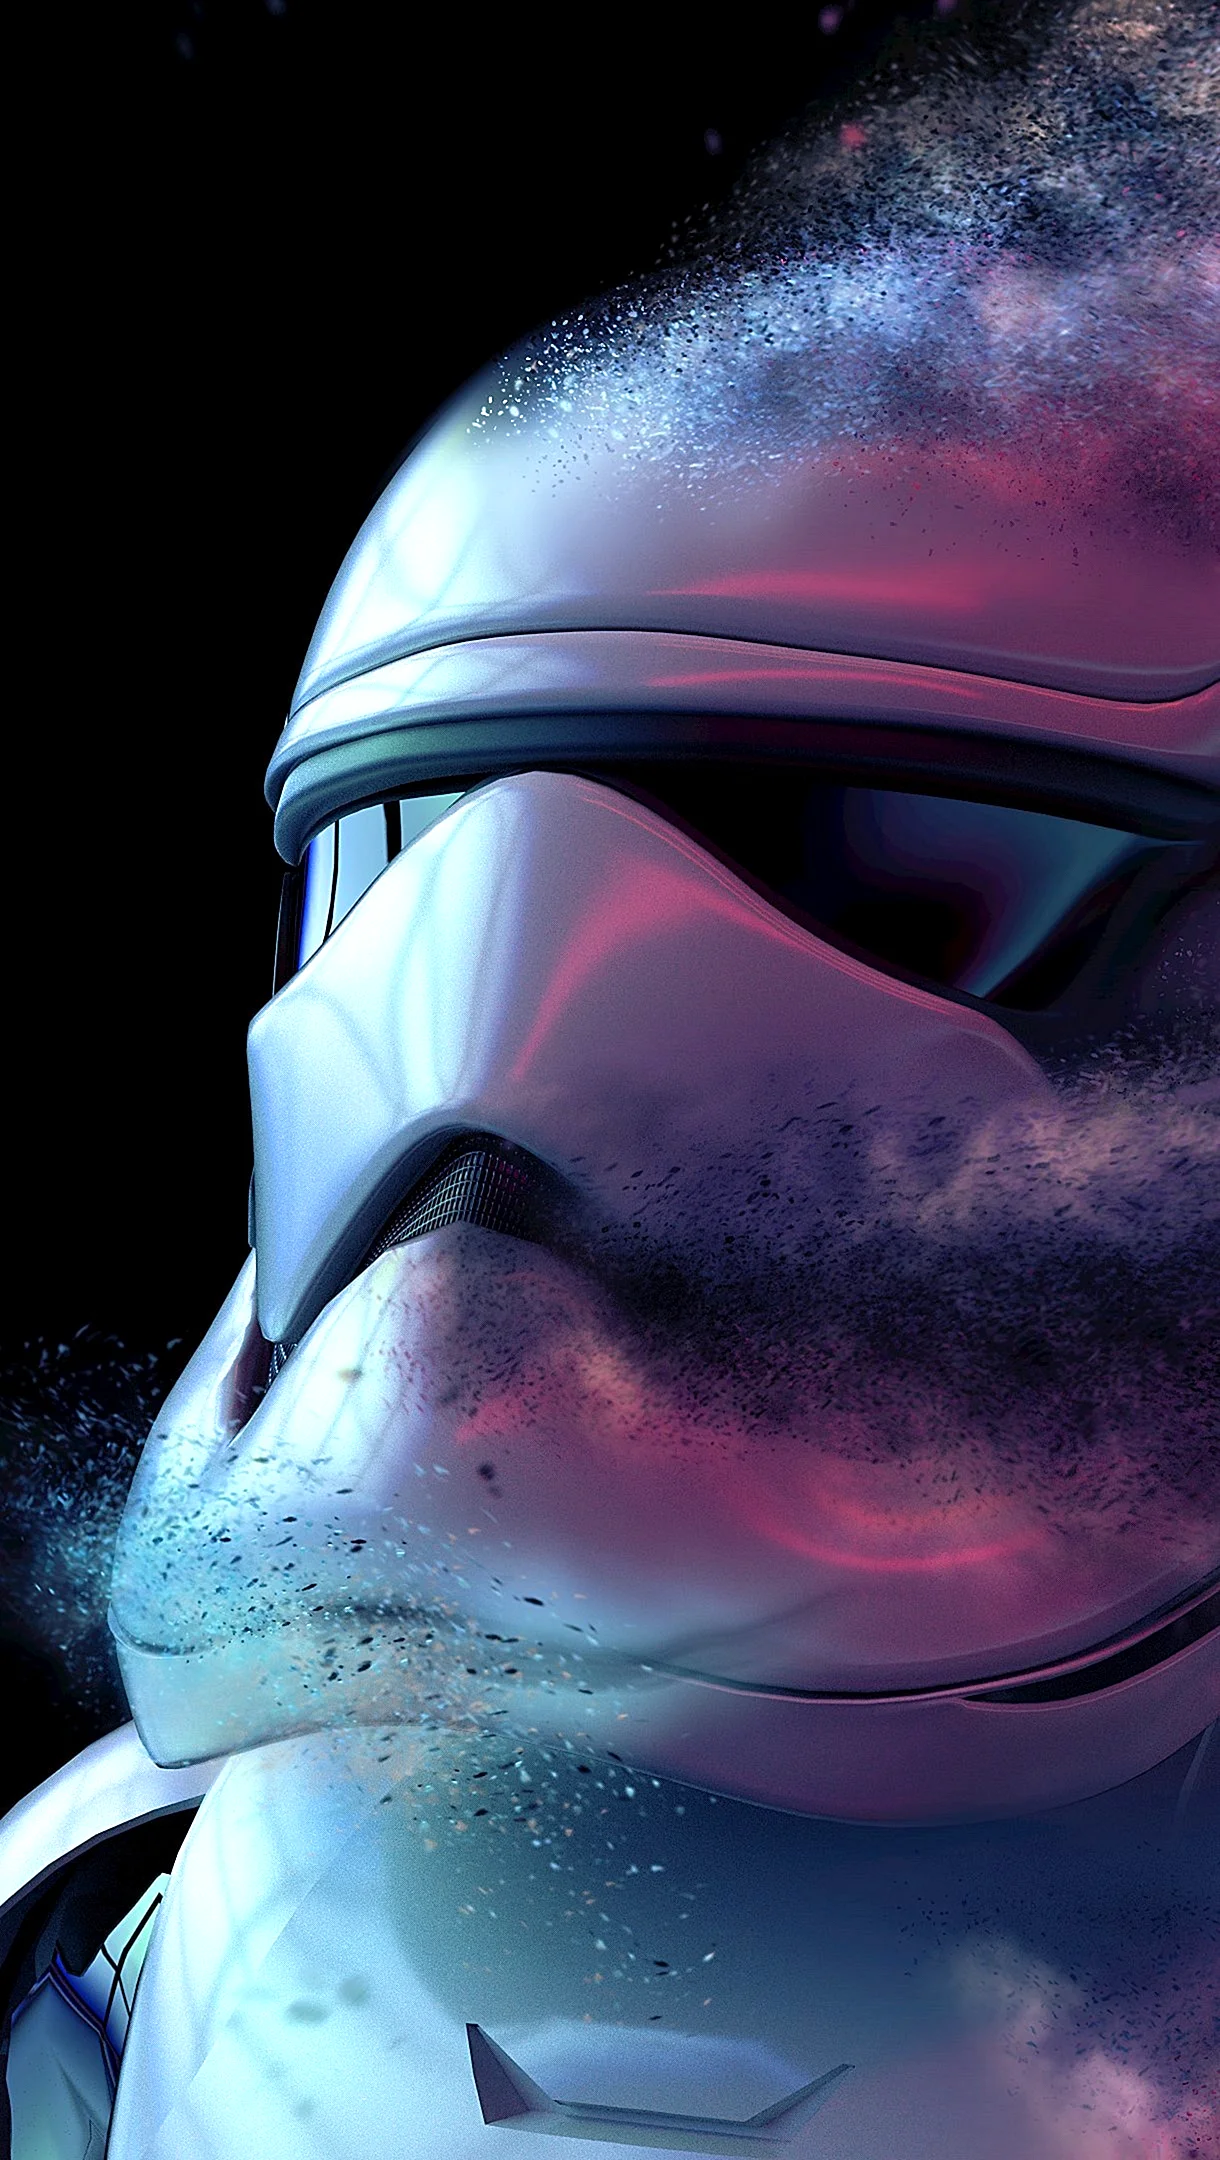 Amoled Star Wars Wallpaper For iPhone